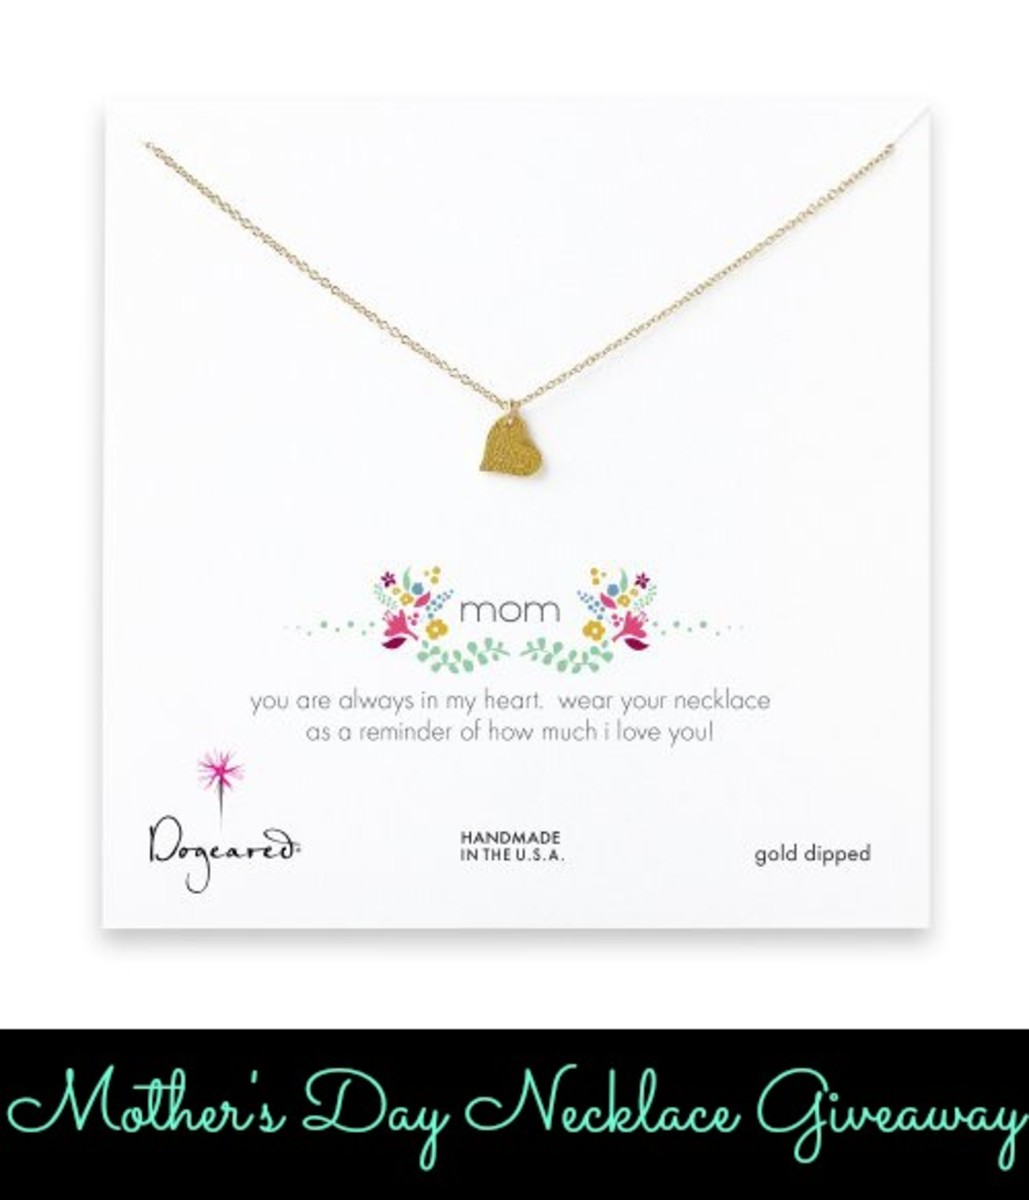 Zappos Motherâ€™s Day Giveaway | MomTrends